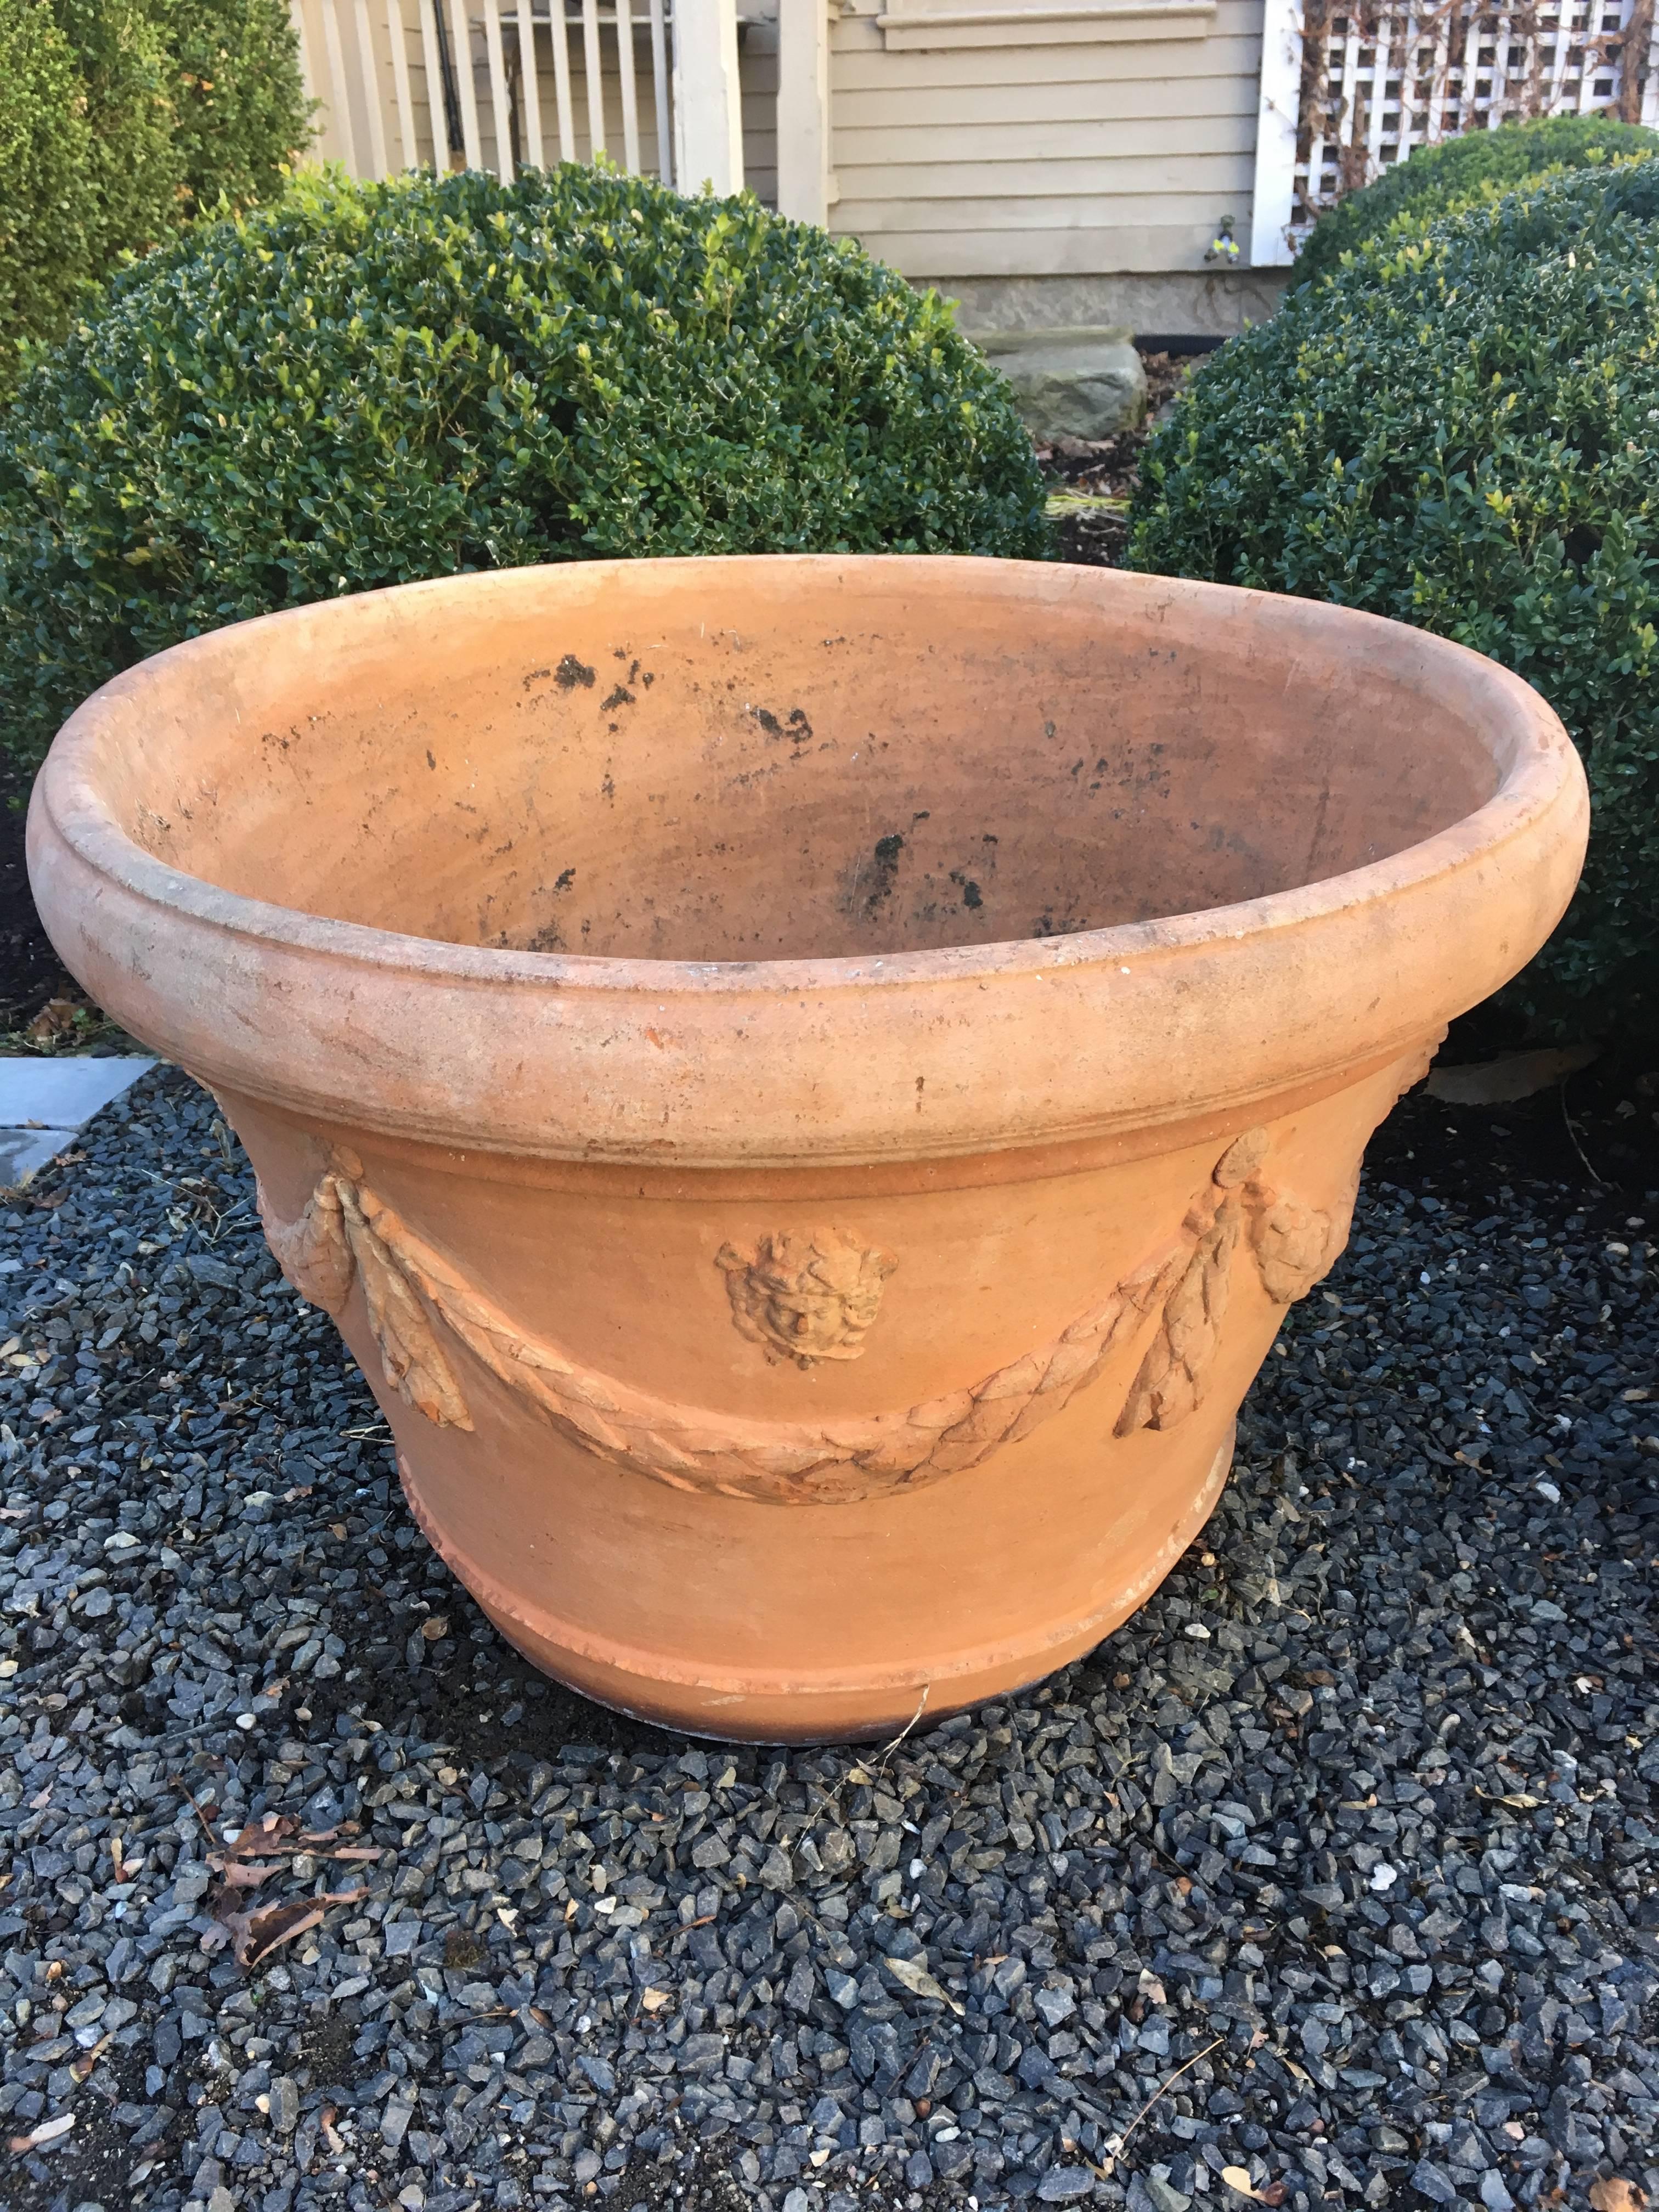 These lovely classical terra cotta planters are adorned with laurel swags, tassels, and petite lions heads and each is signed by the maker, Domenico Ricceri of Imprunetta, Italy. Large enough to accommodate a commodious planting of lavender or the